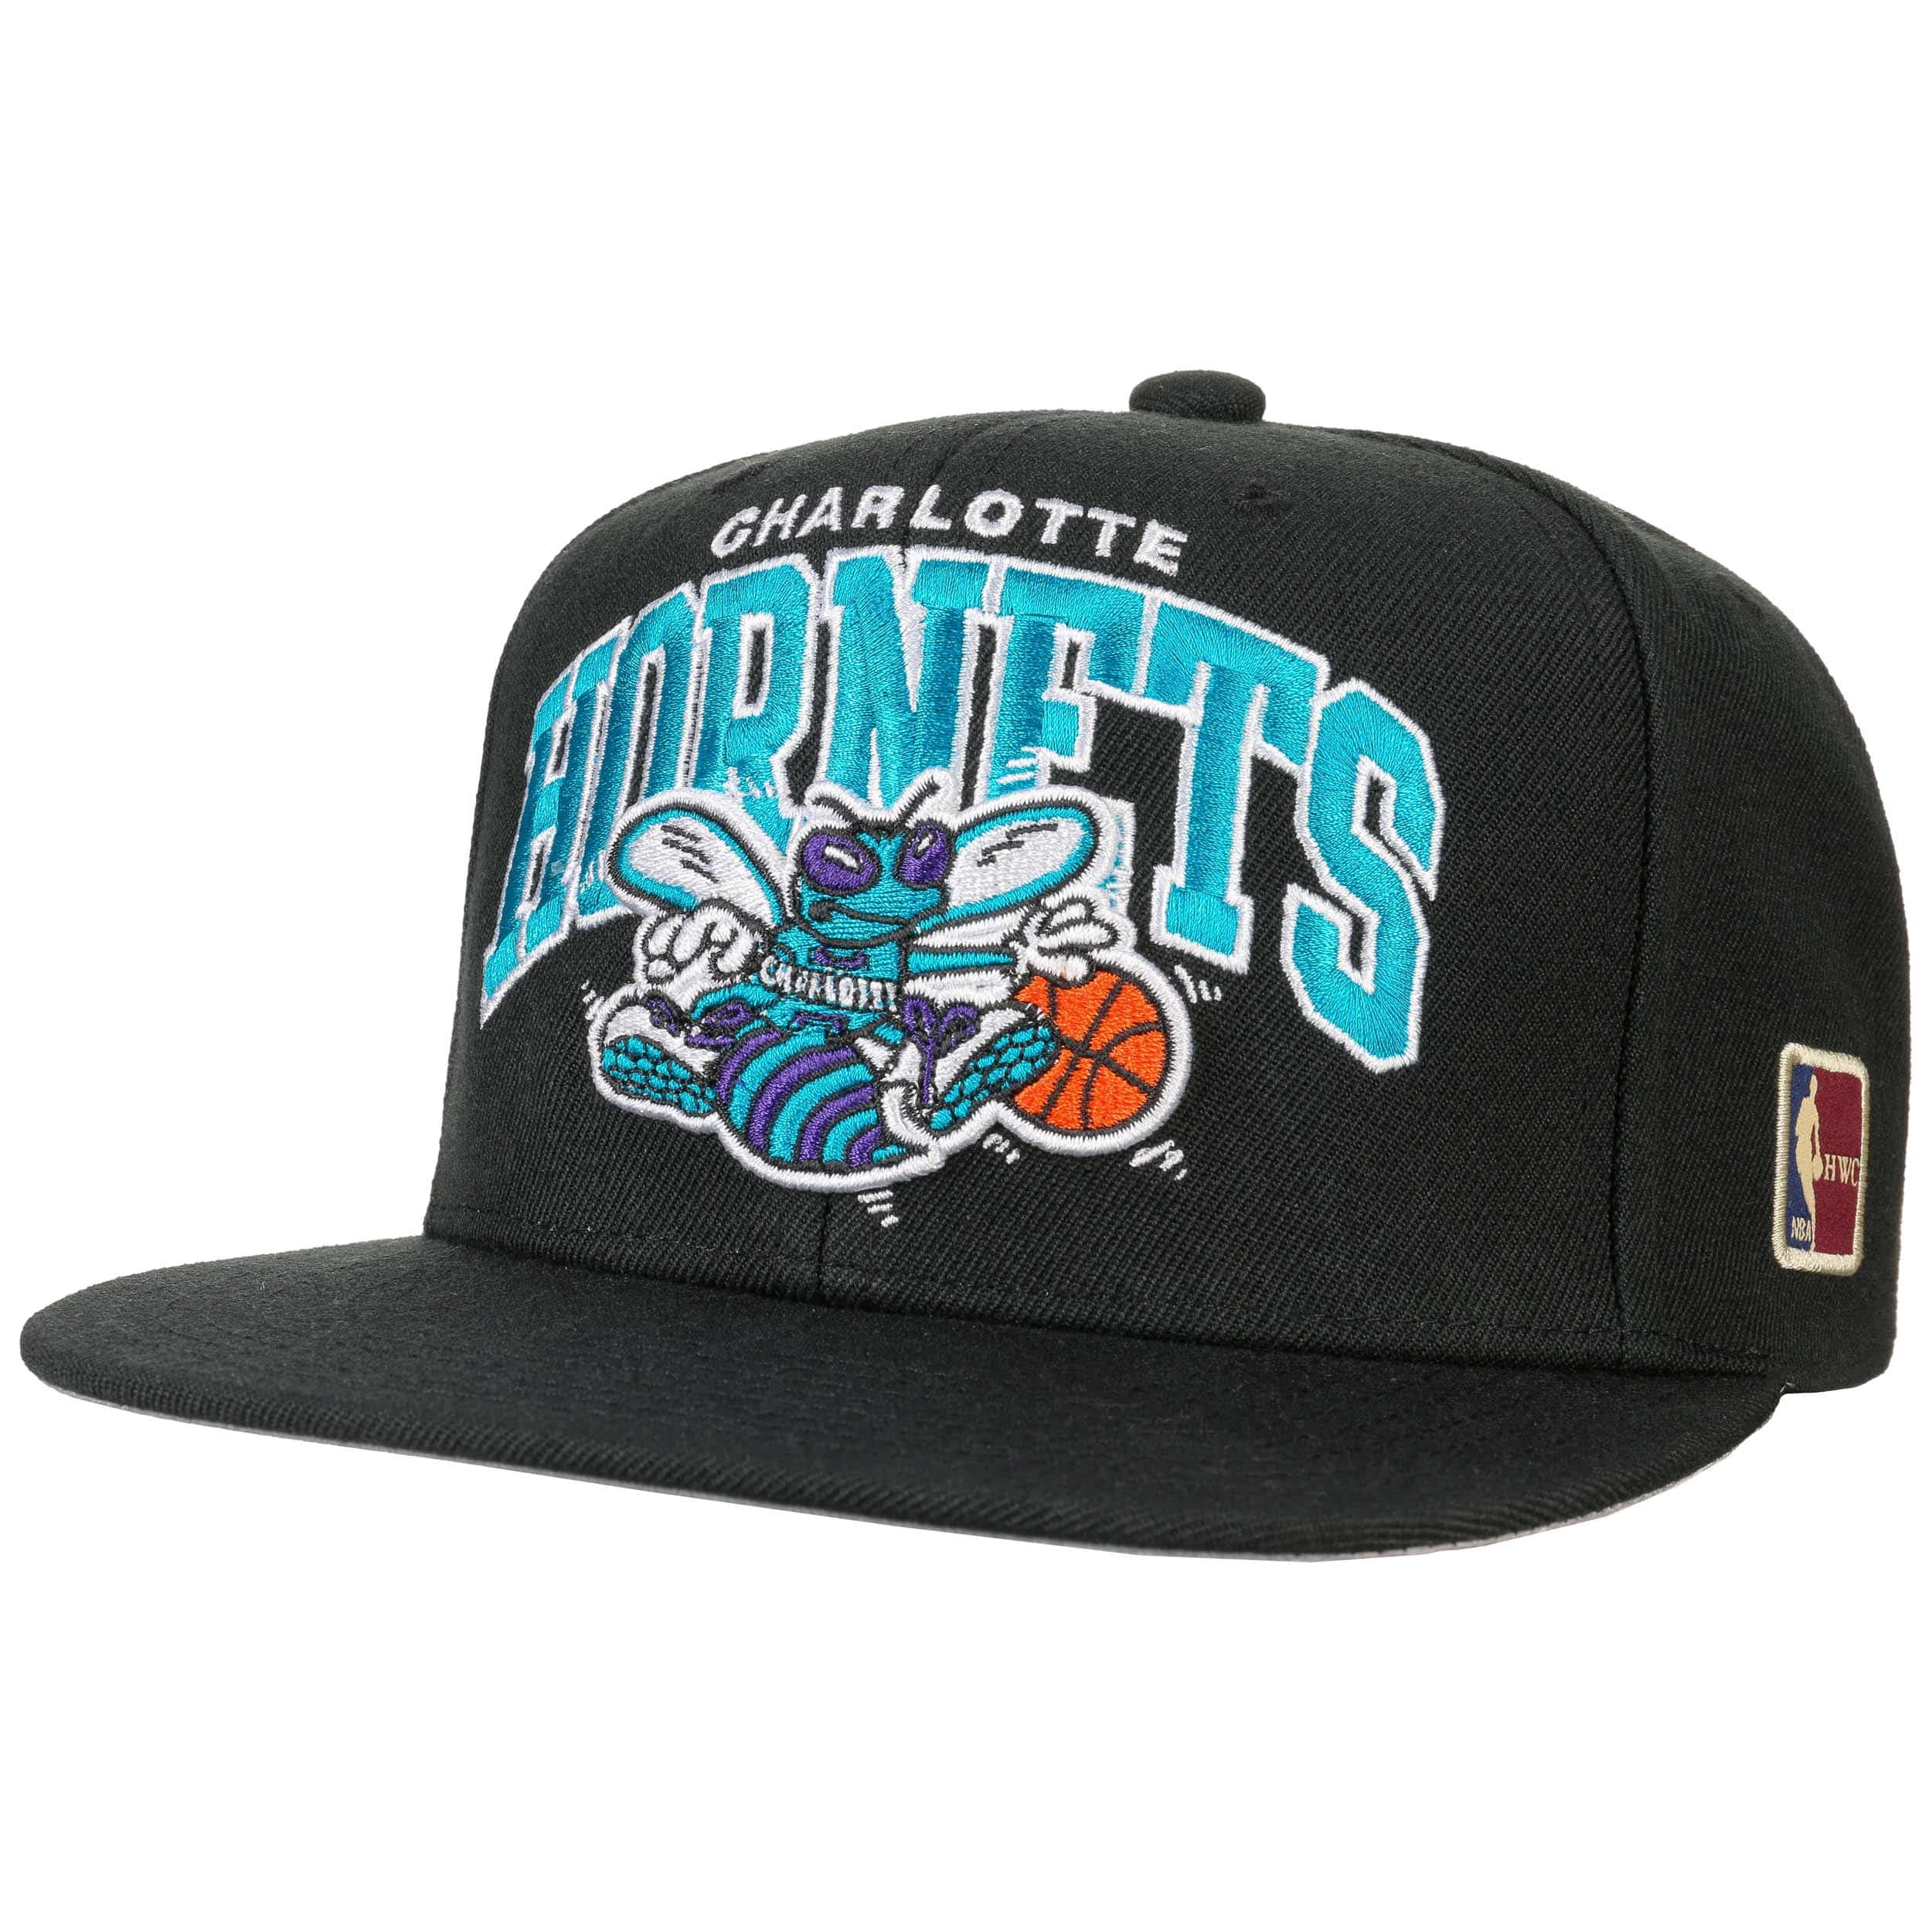 hornets mitchell and ness